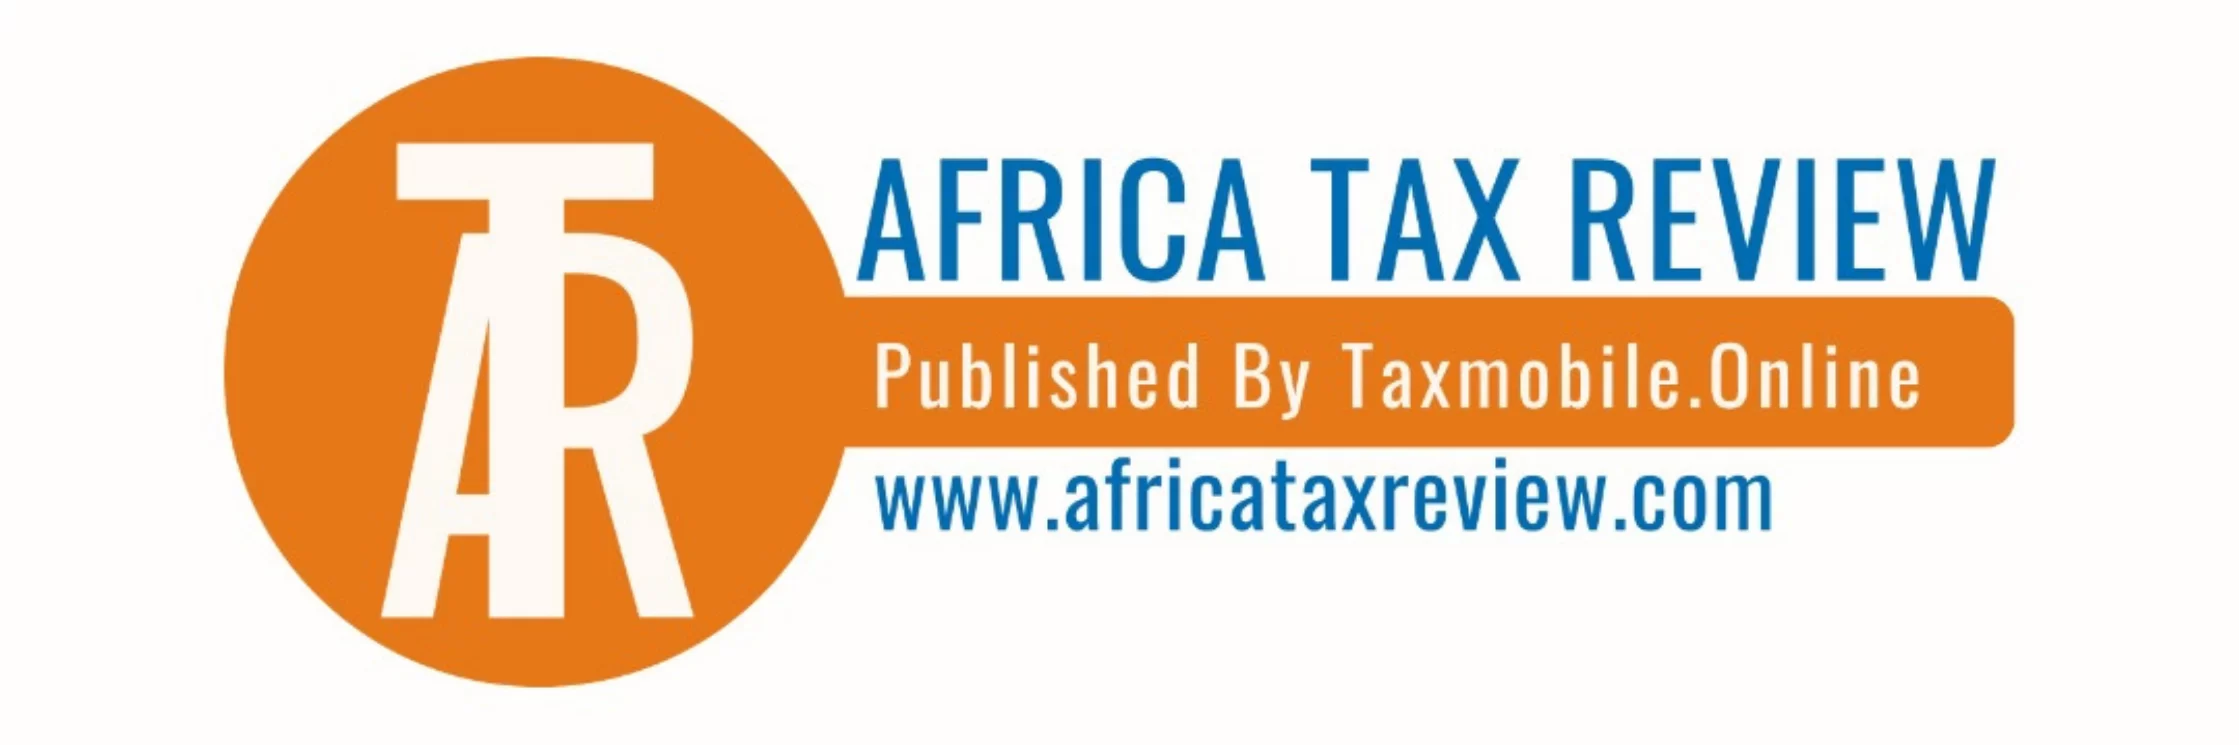 Africa Tax Review